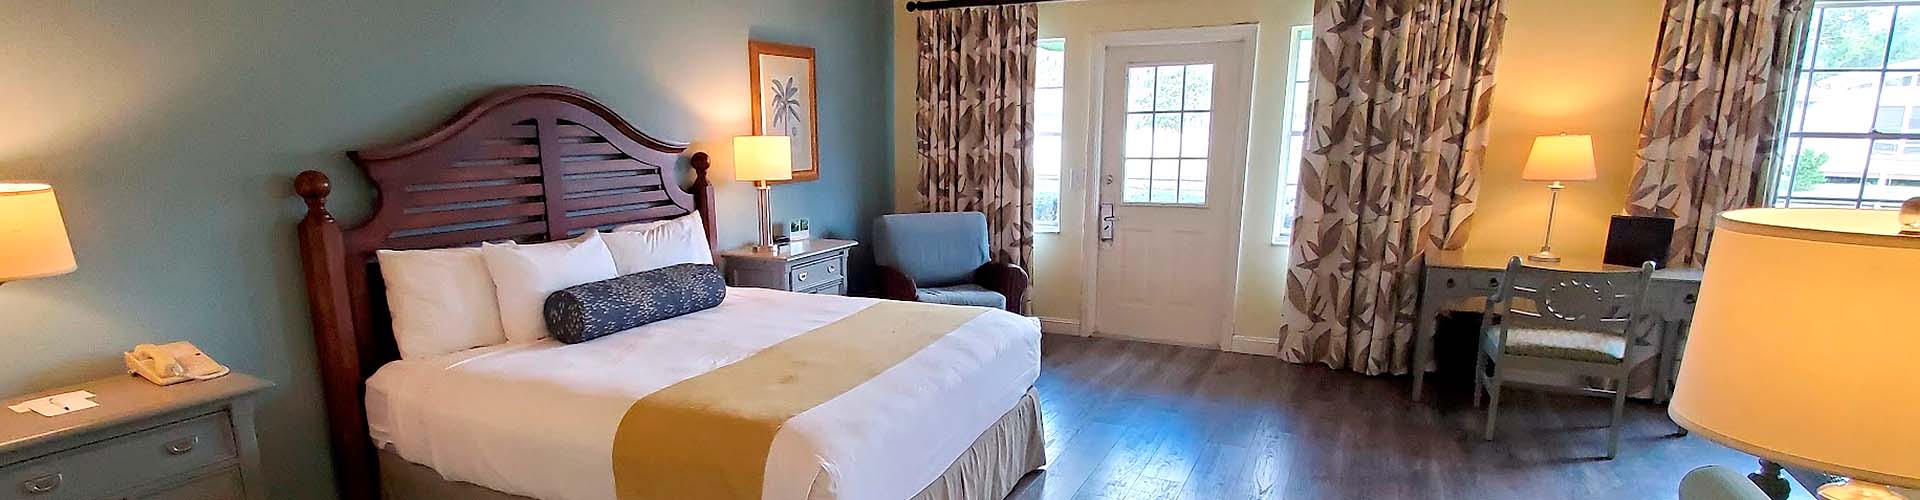 panoramic view of a hotel bedroom with features as a queen bed size, two nightstands and a simple study desk 